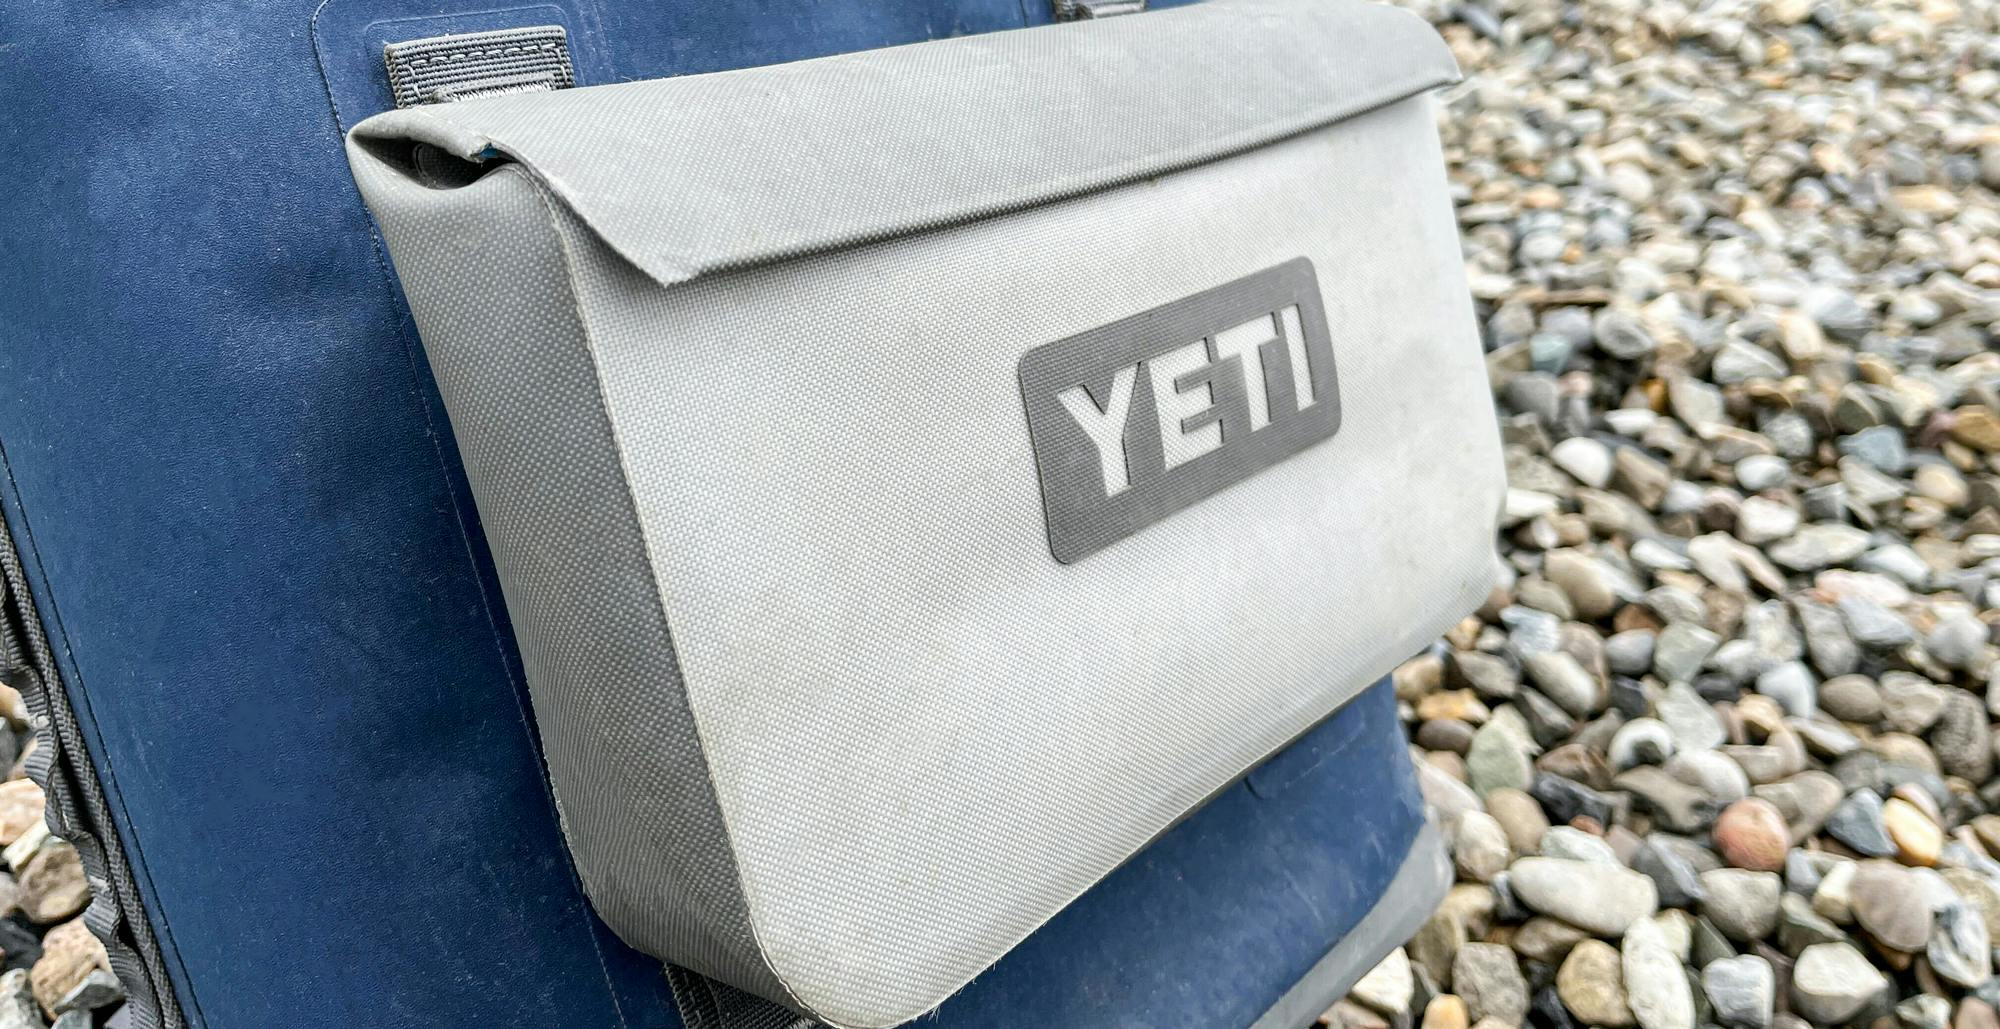 Yeti Cooler Recall: How to Get a Replacement or Refund